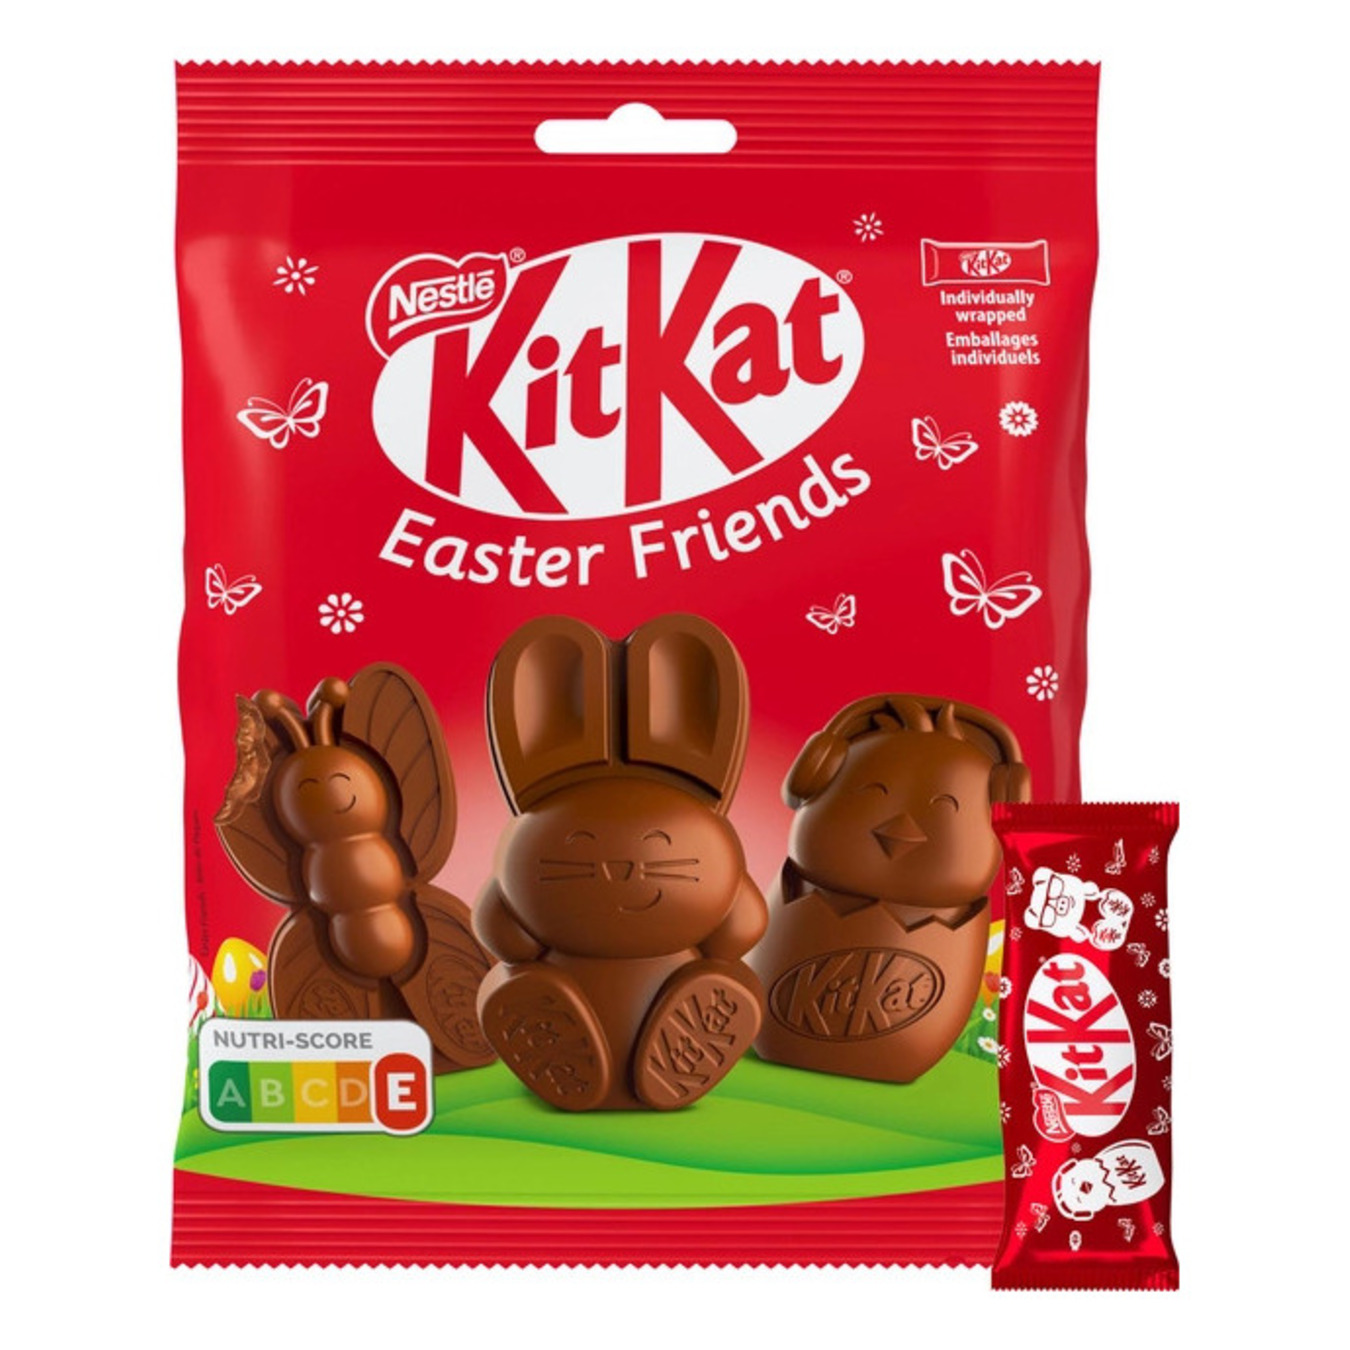 A set of Nestle chocolate figures 65g